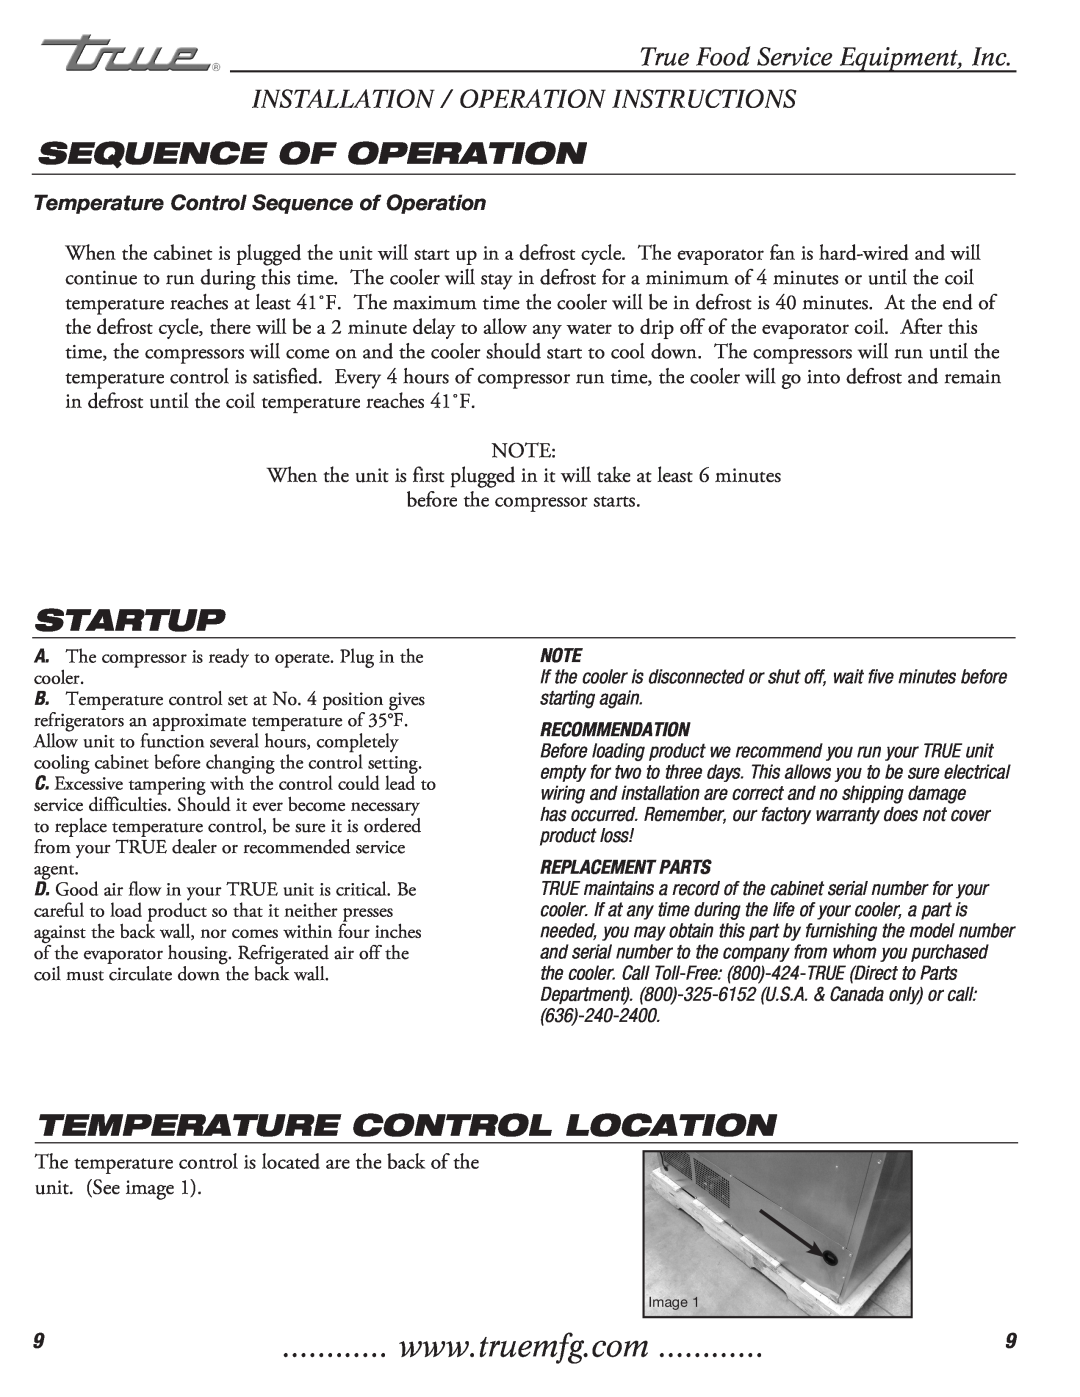 True Manufacturing Company TFP-32-12M-D-2 installation manual Sequence Of Operation, Startup, Temperature Control Location 